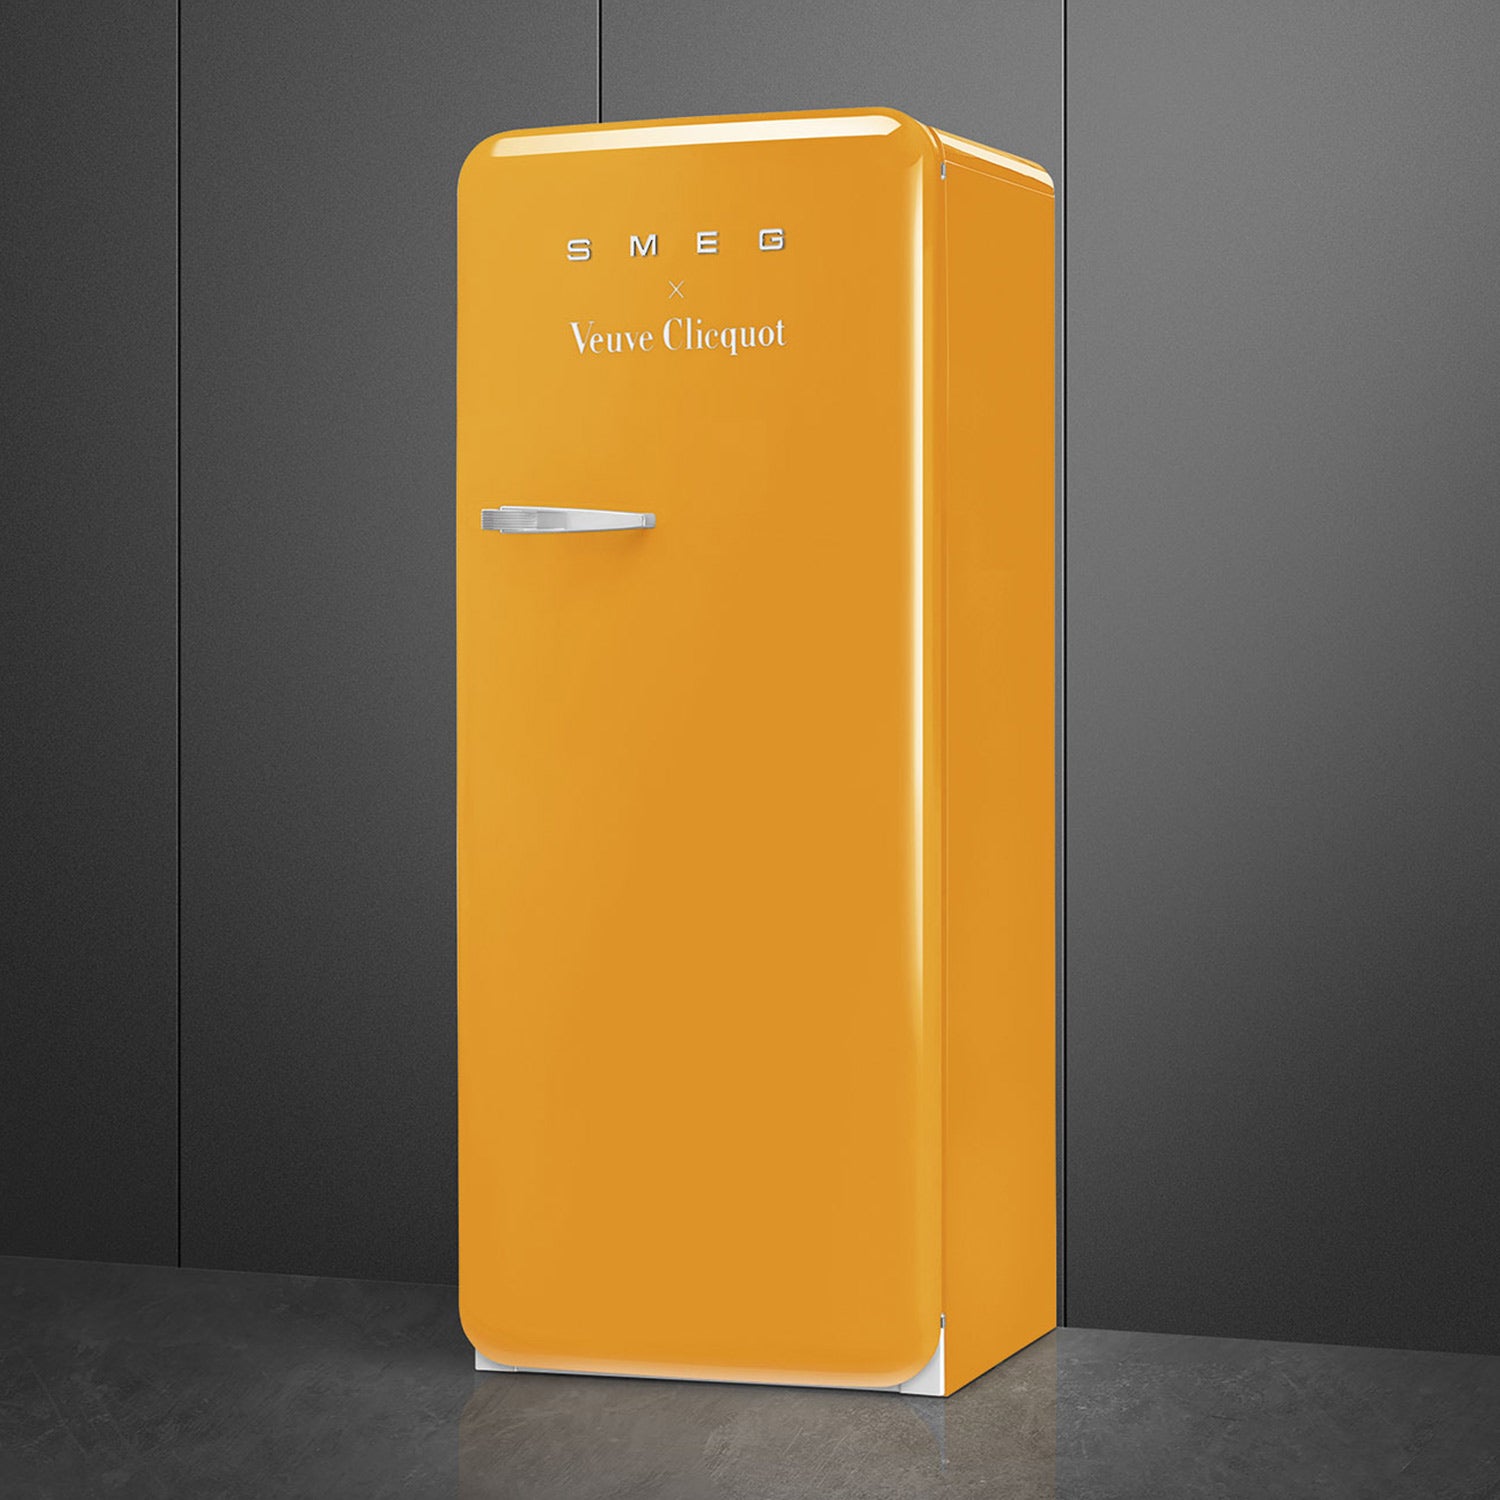 Smeg Has Collaborated With Veuve Clicquot on a Limited-Edition